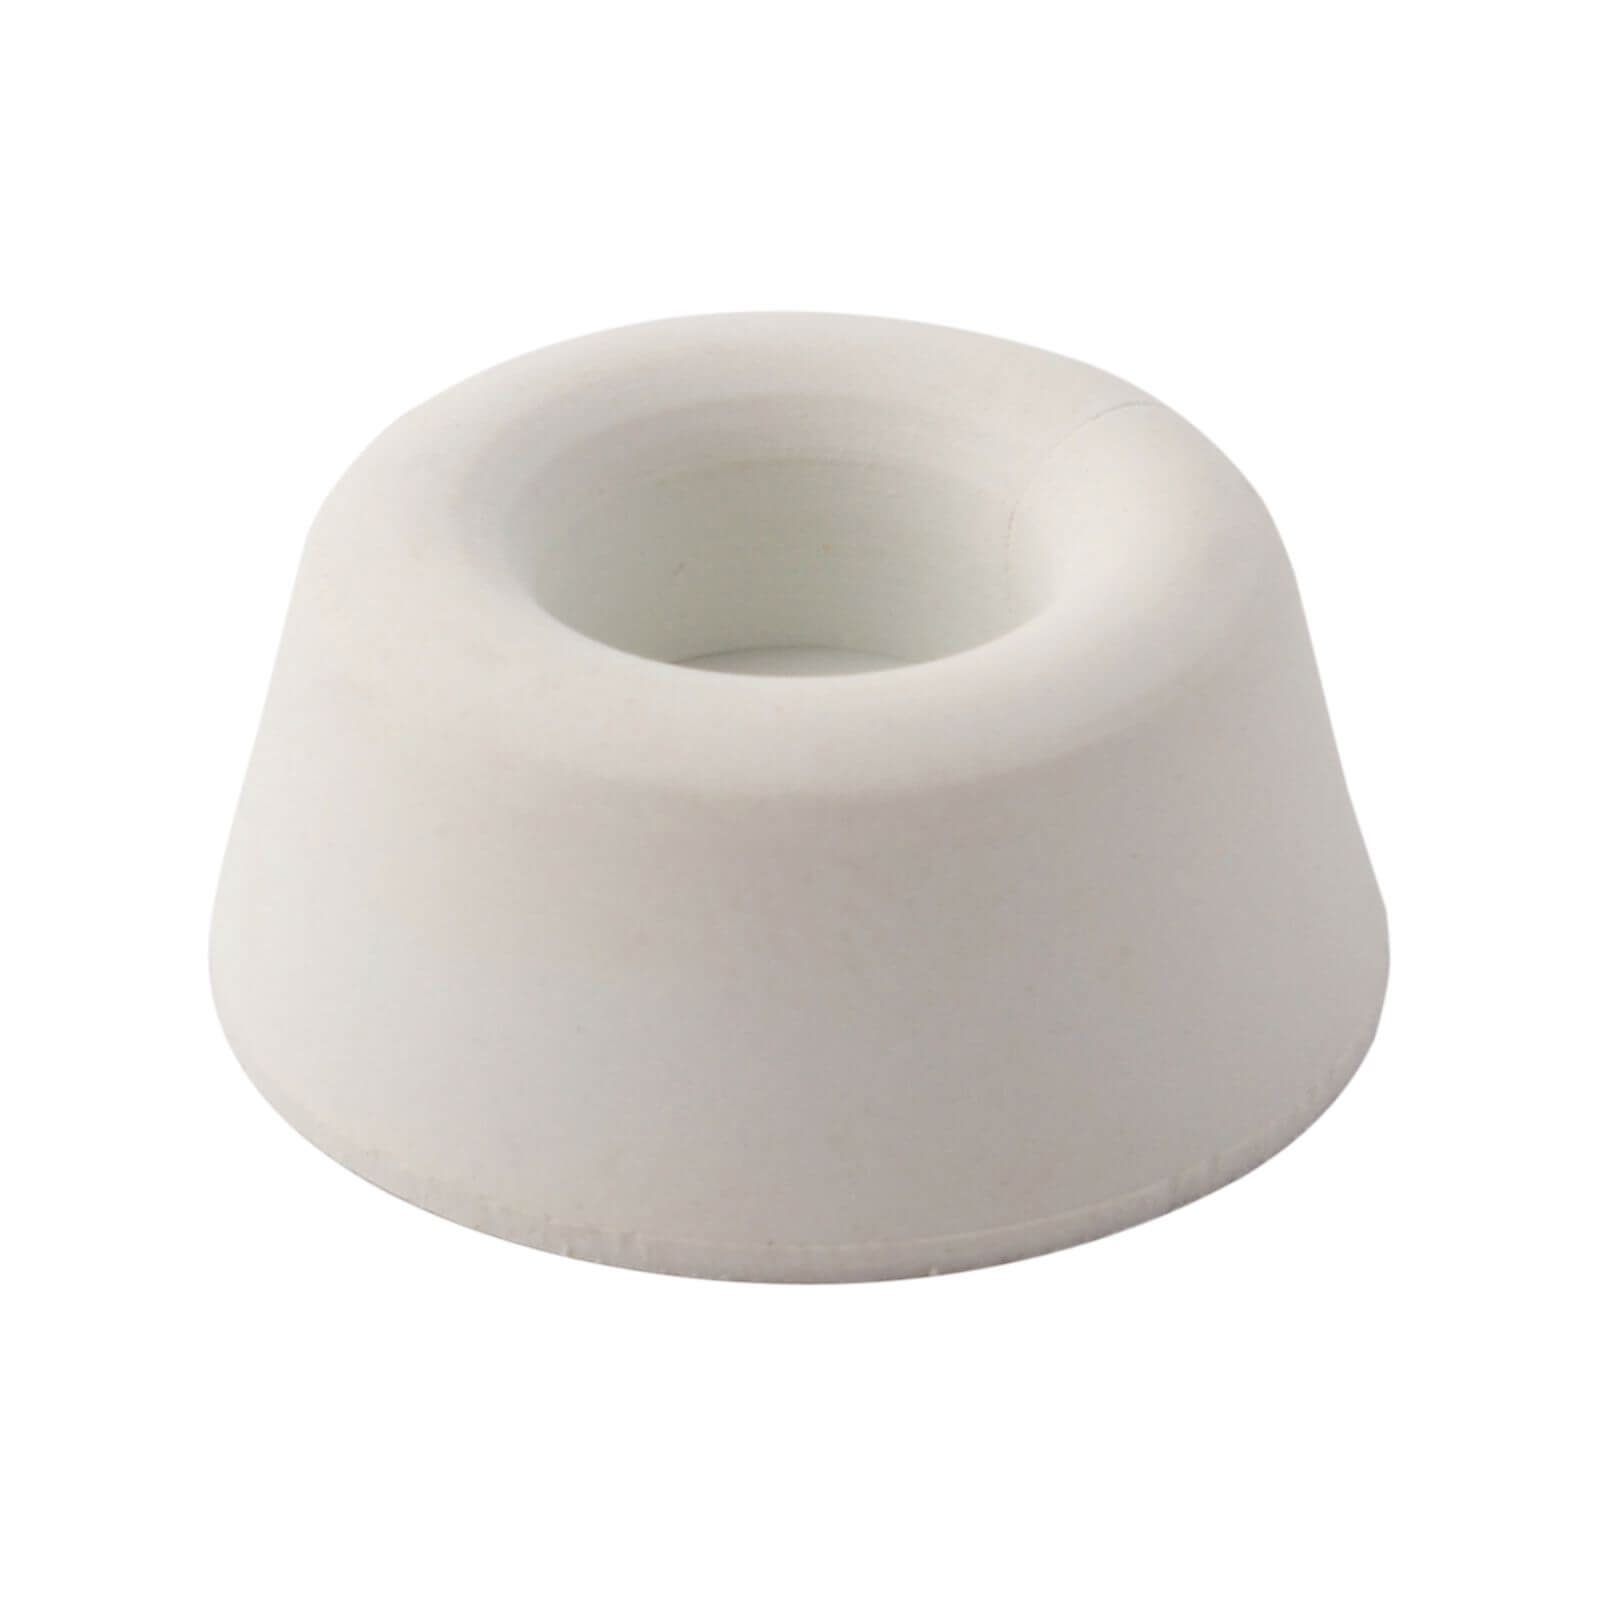 Photo of Chair Buffers - White Rubber - 4 Pack